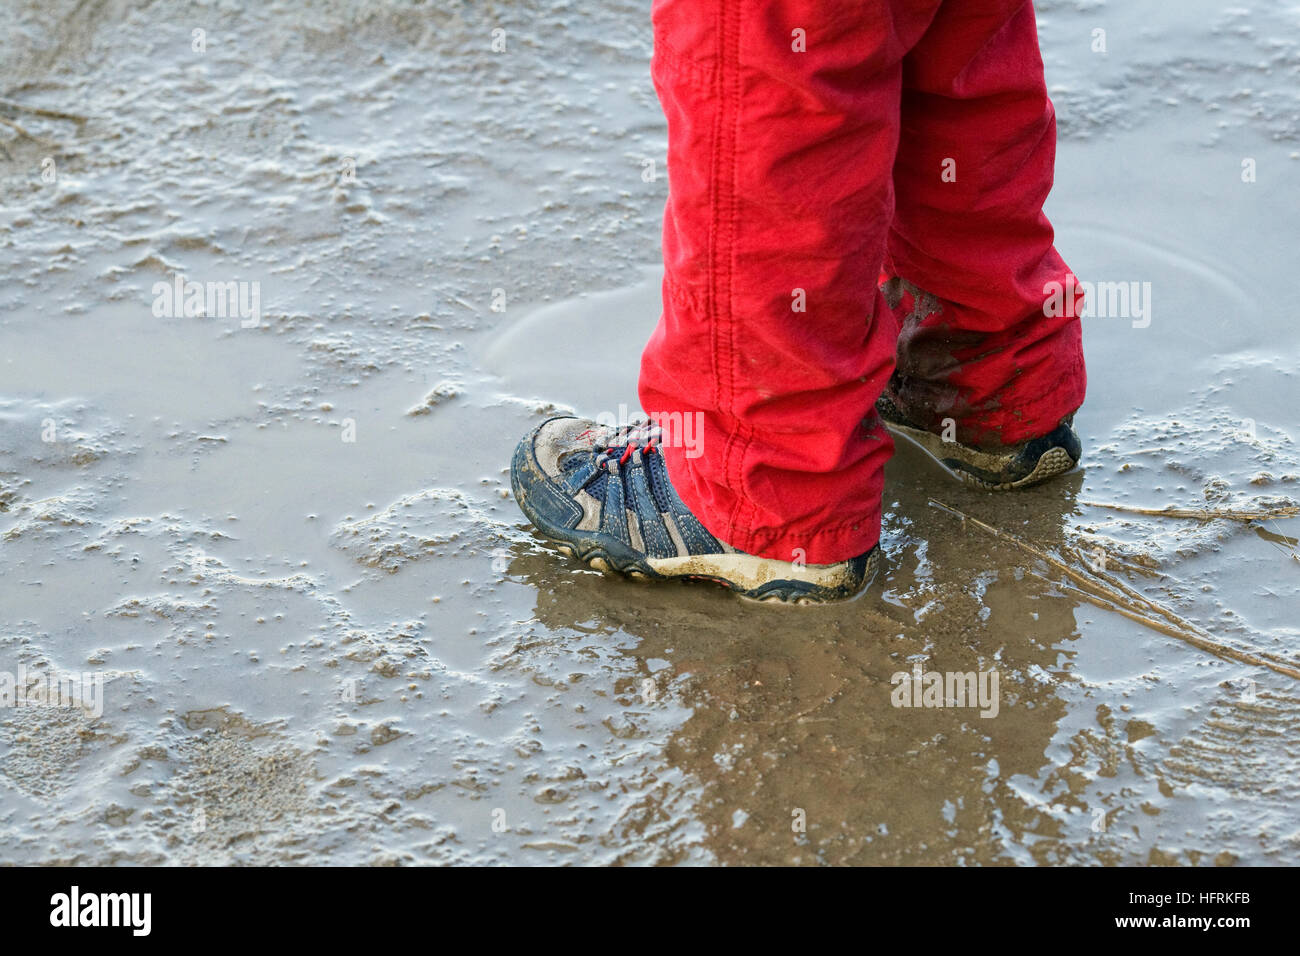 A young child playing in a muddy puddle. Stock Photo